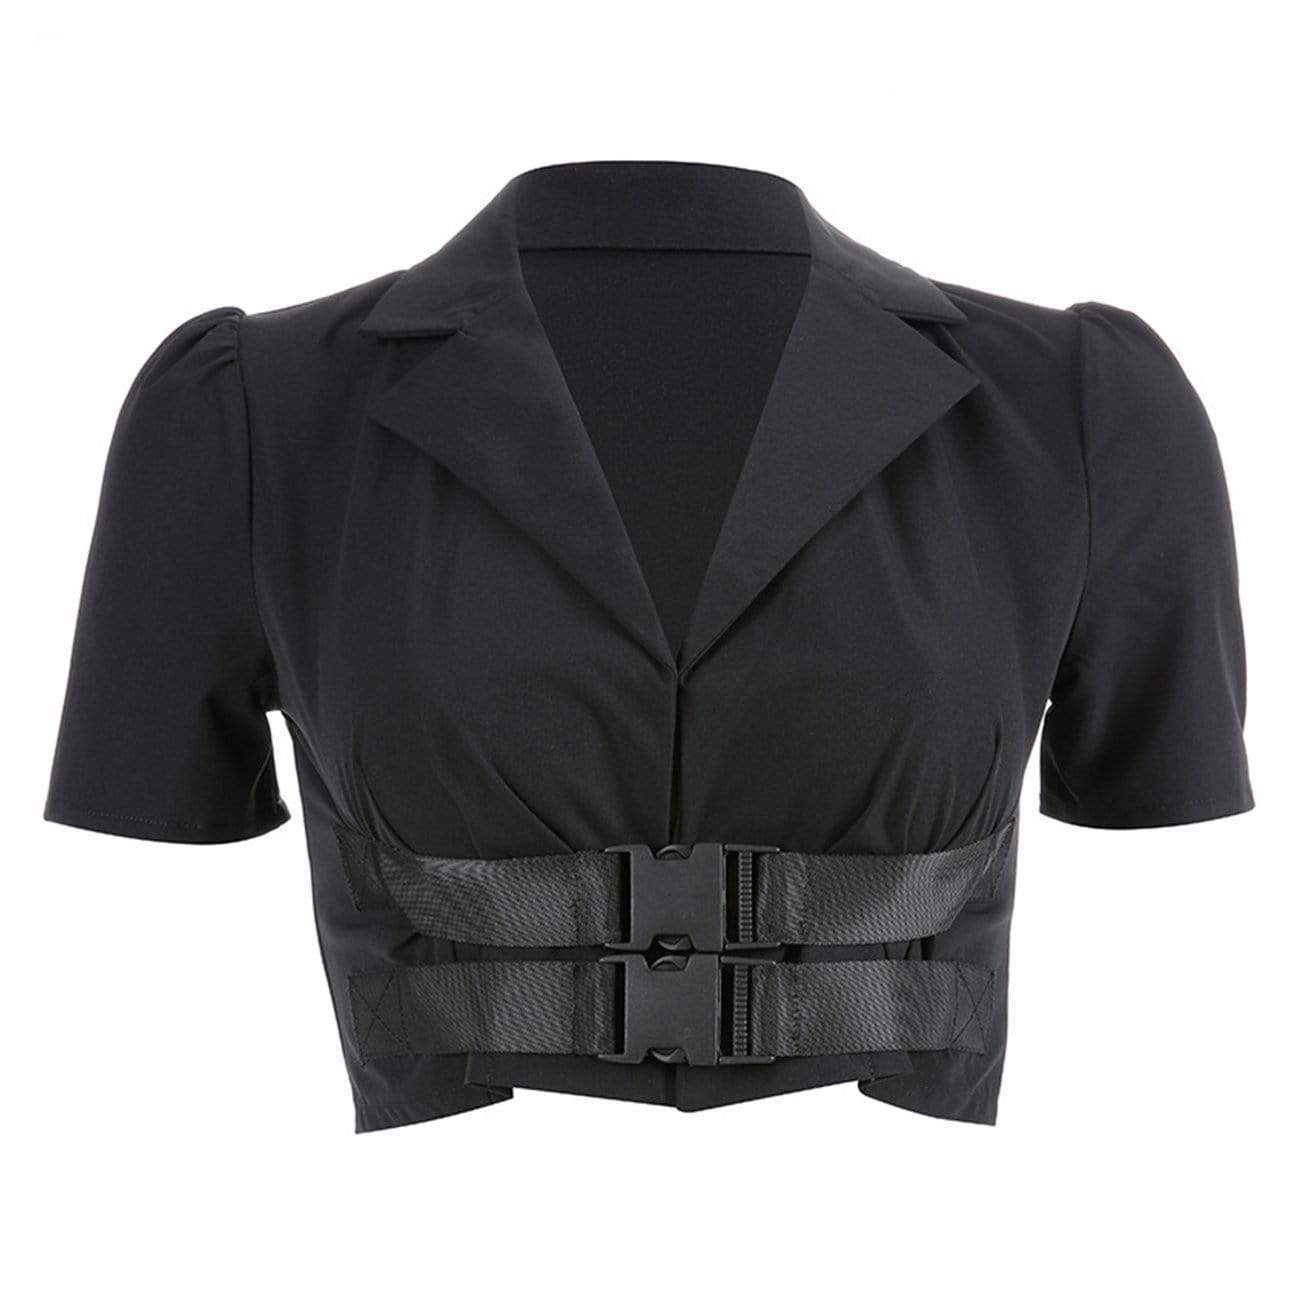 TO Classic Buckle Tape Belts Crop Top